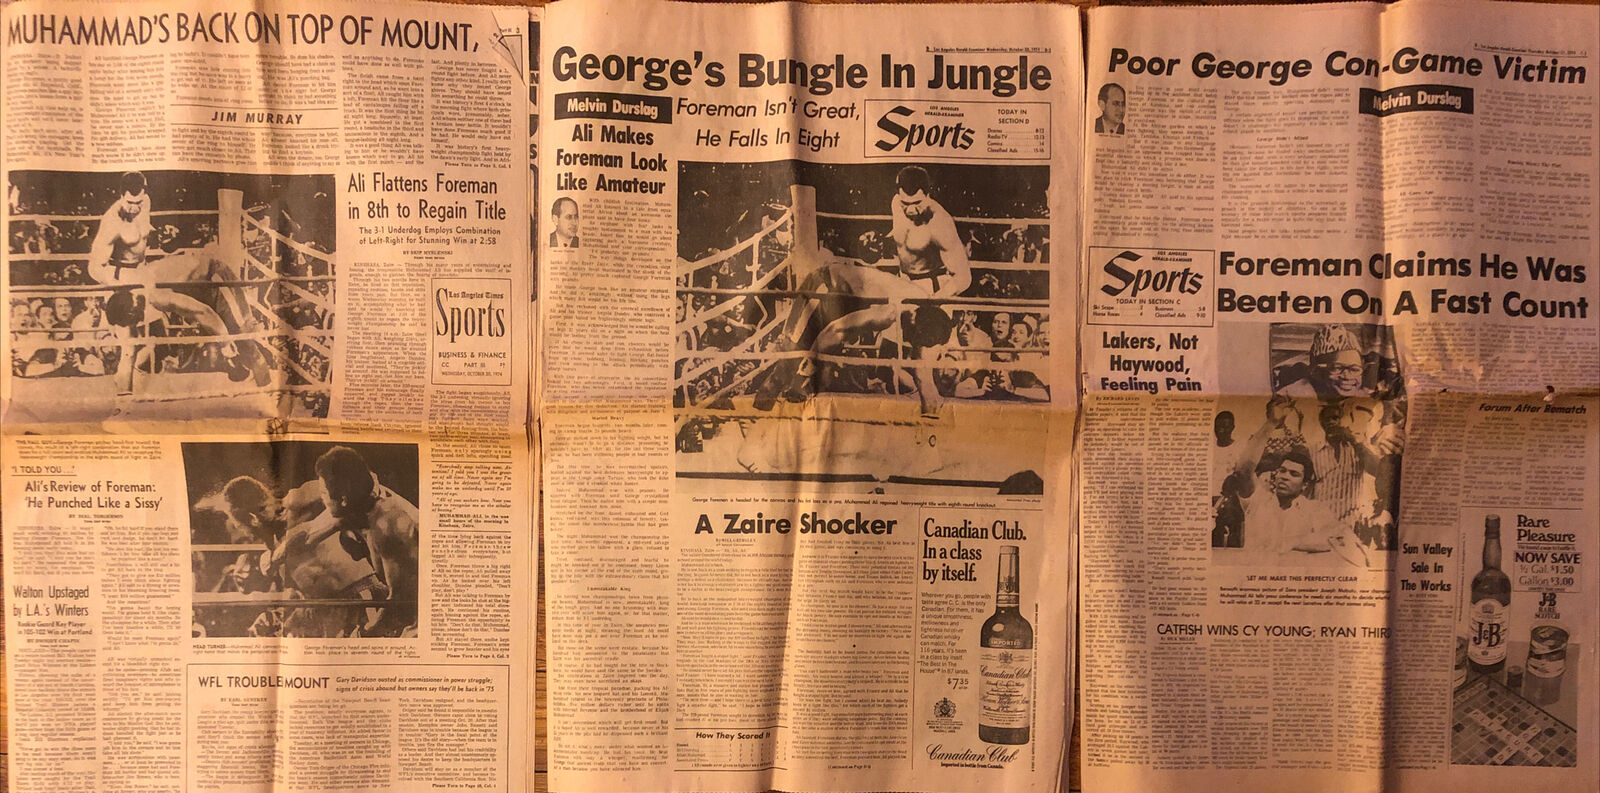 Muhammad Ali Beats George Foreman Rumble in The Jungle 1974 Newspaper Lot of 3